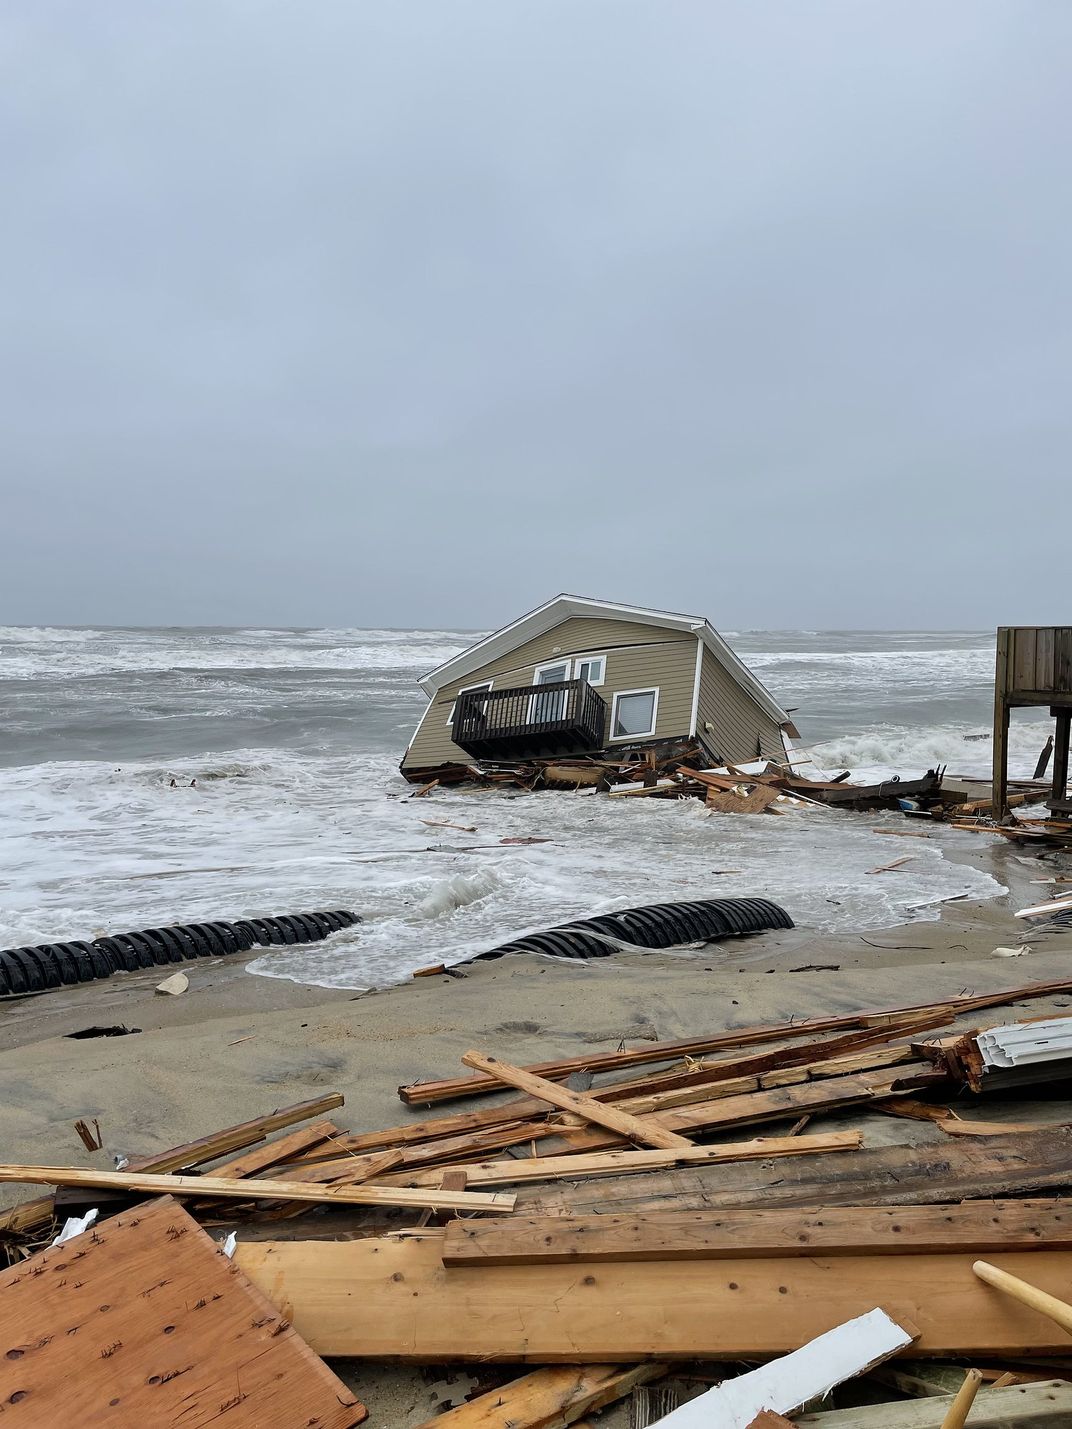 House collapse at Cape Hatteras National Seashore